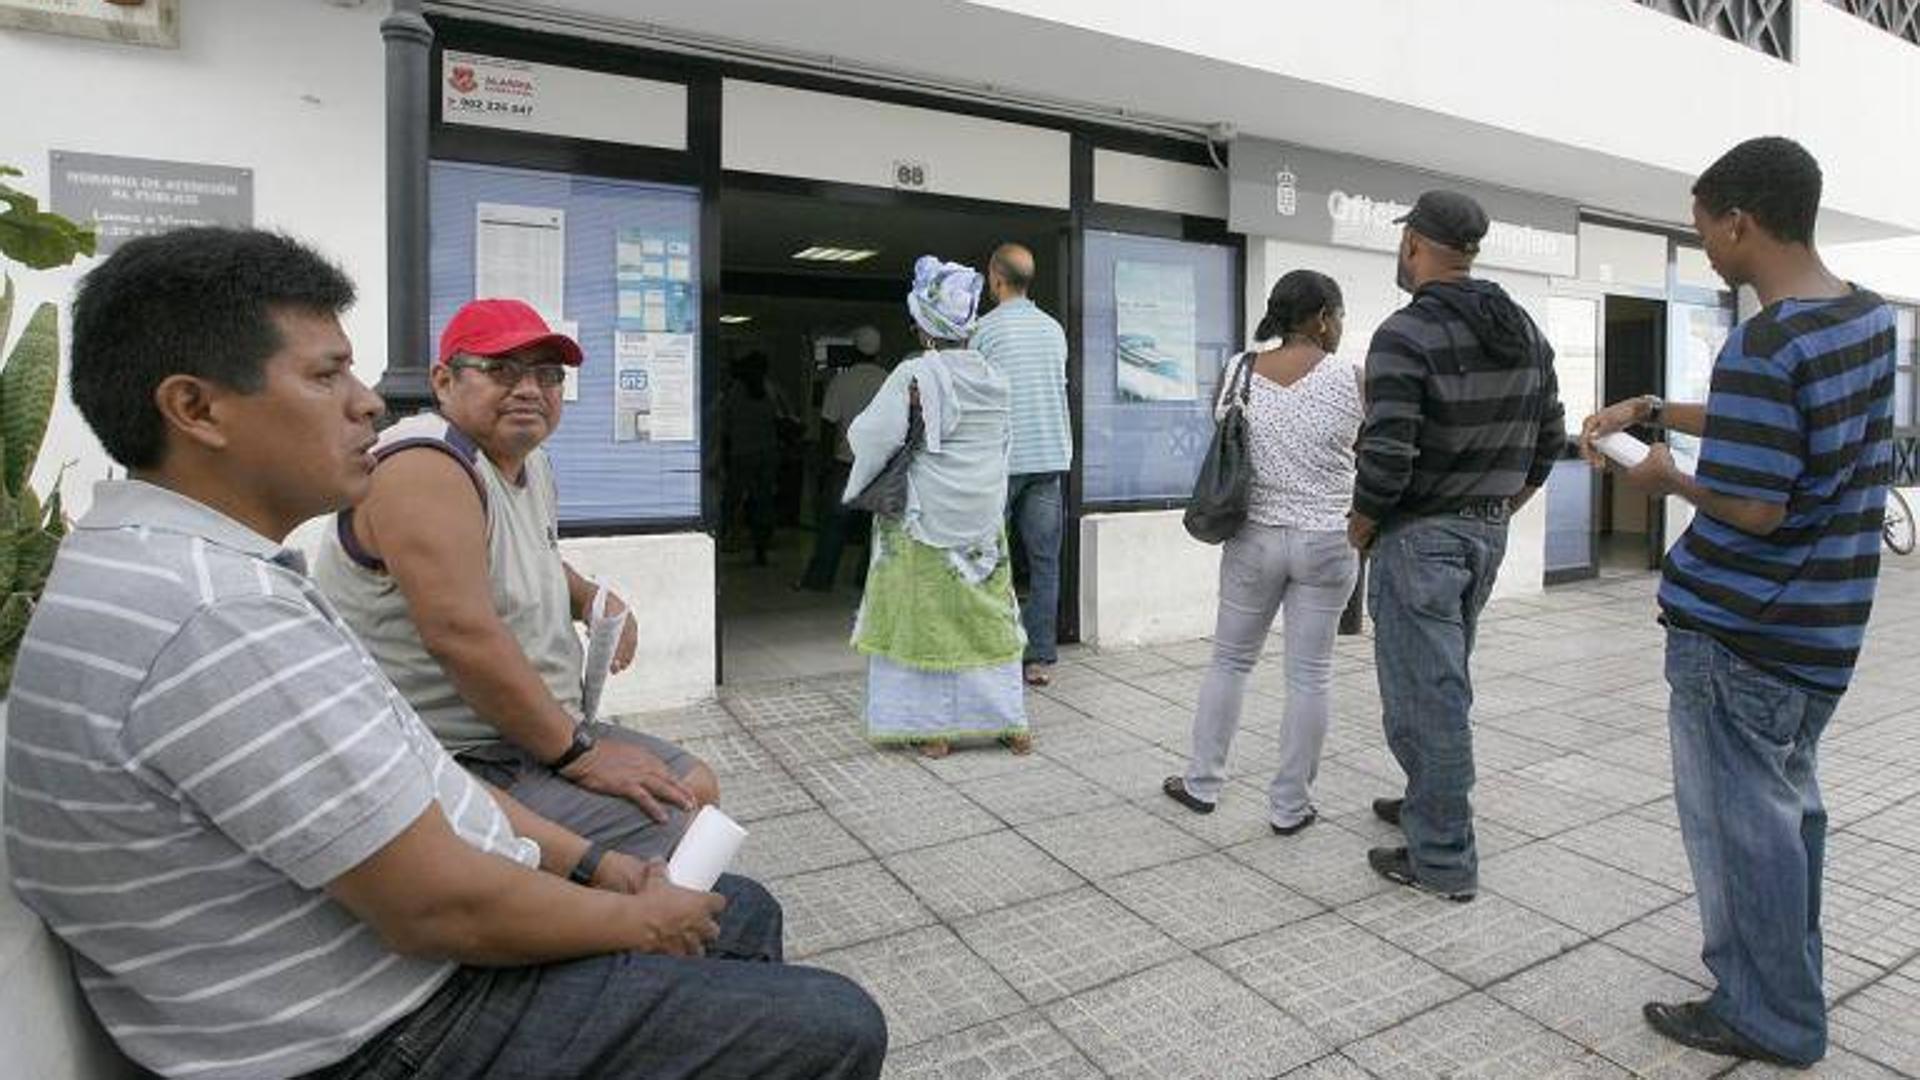 Unemployment drops in the Canary Islands by 3,140 people in May